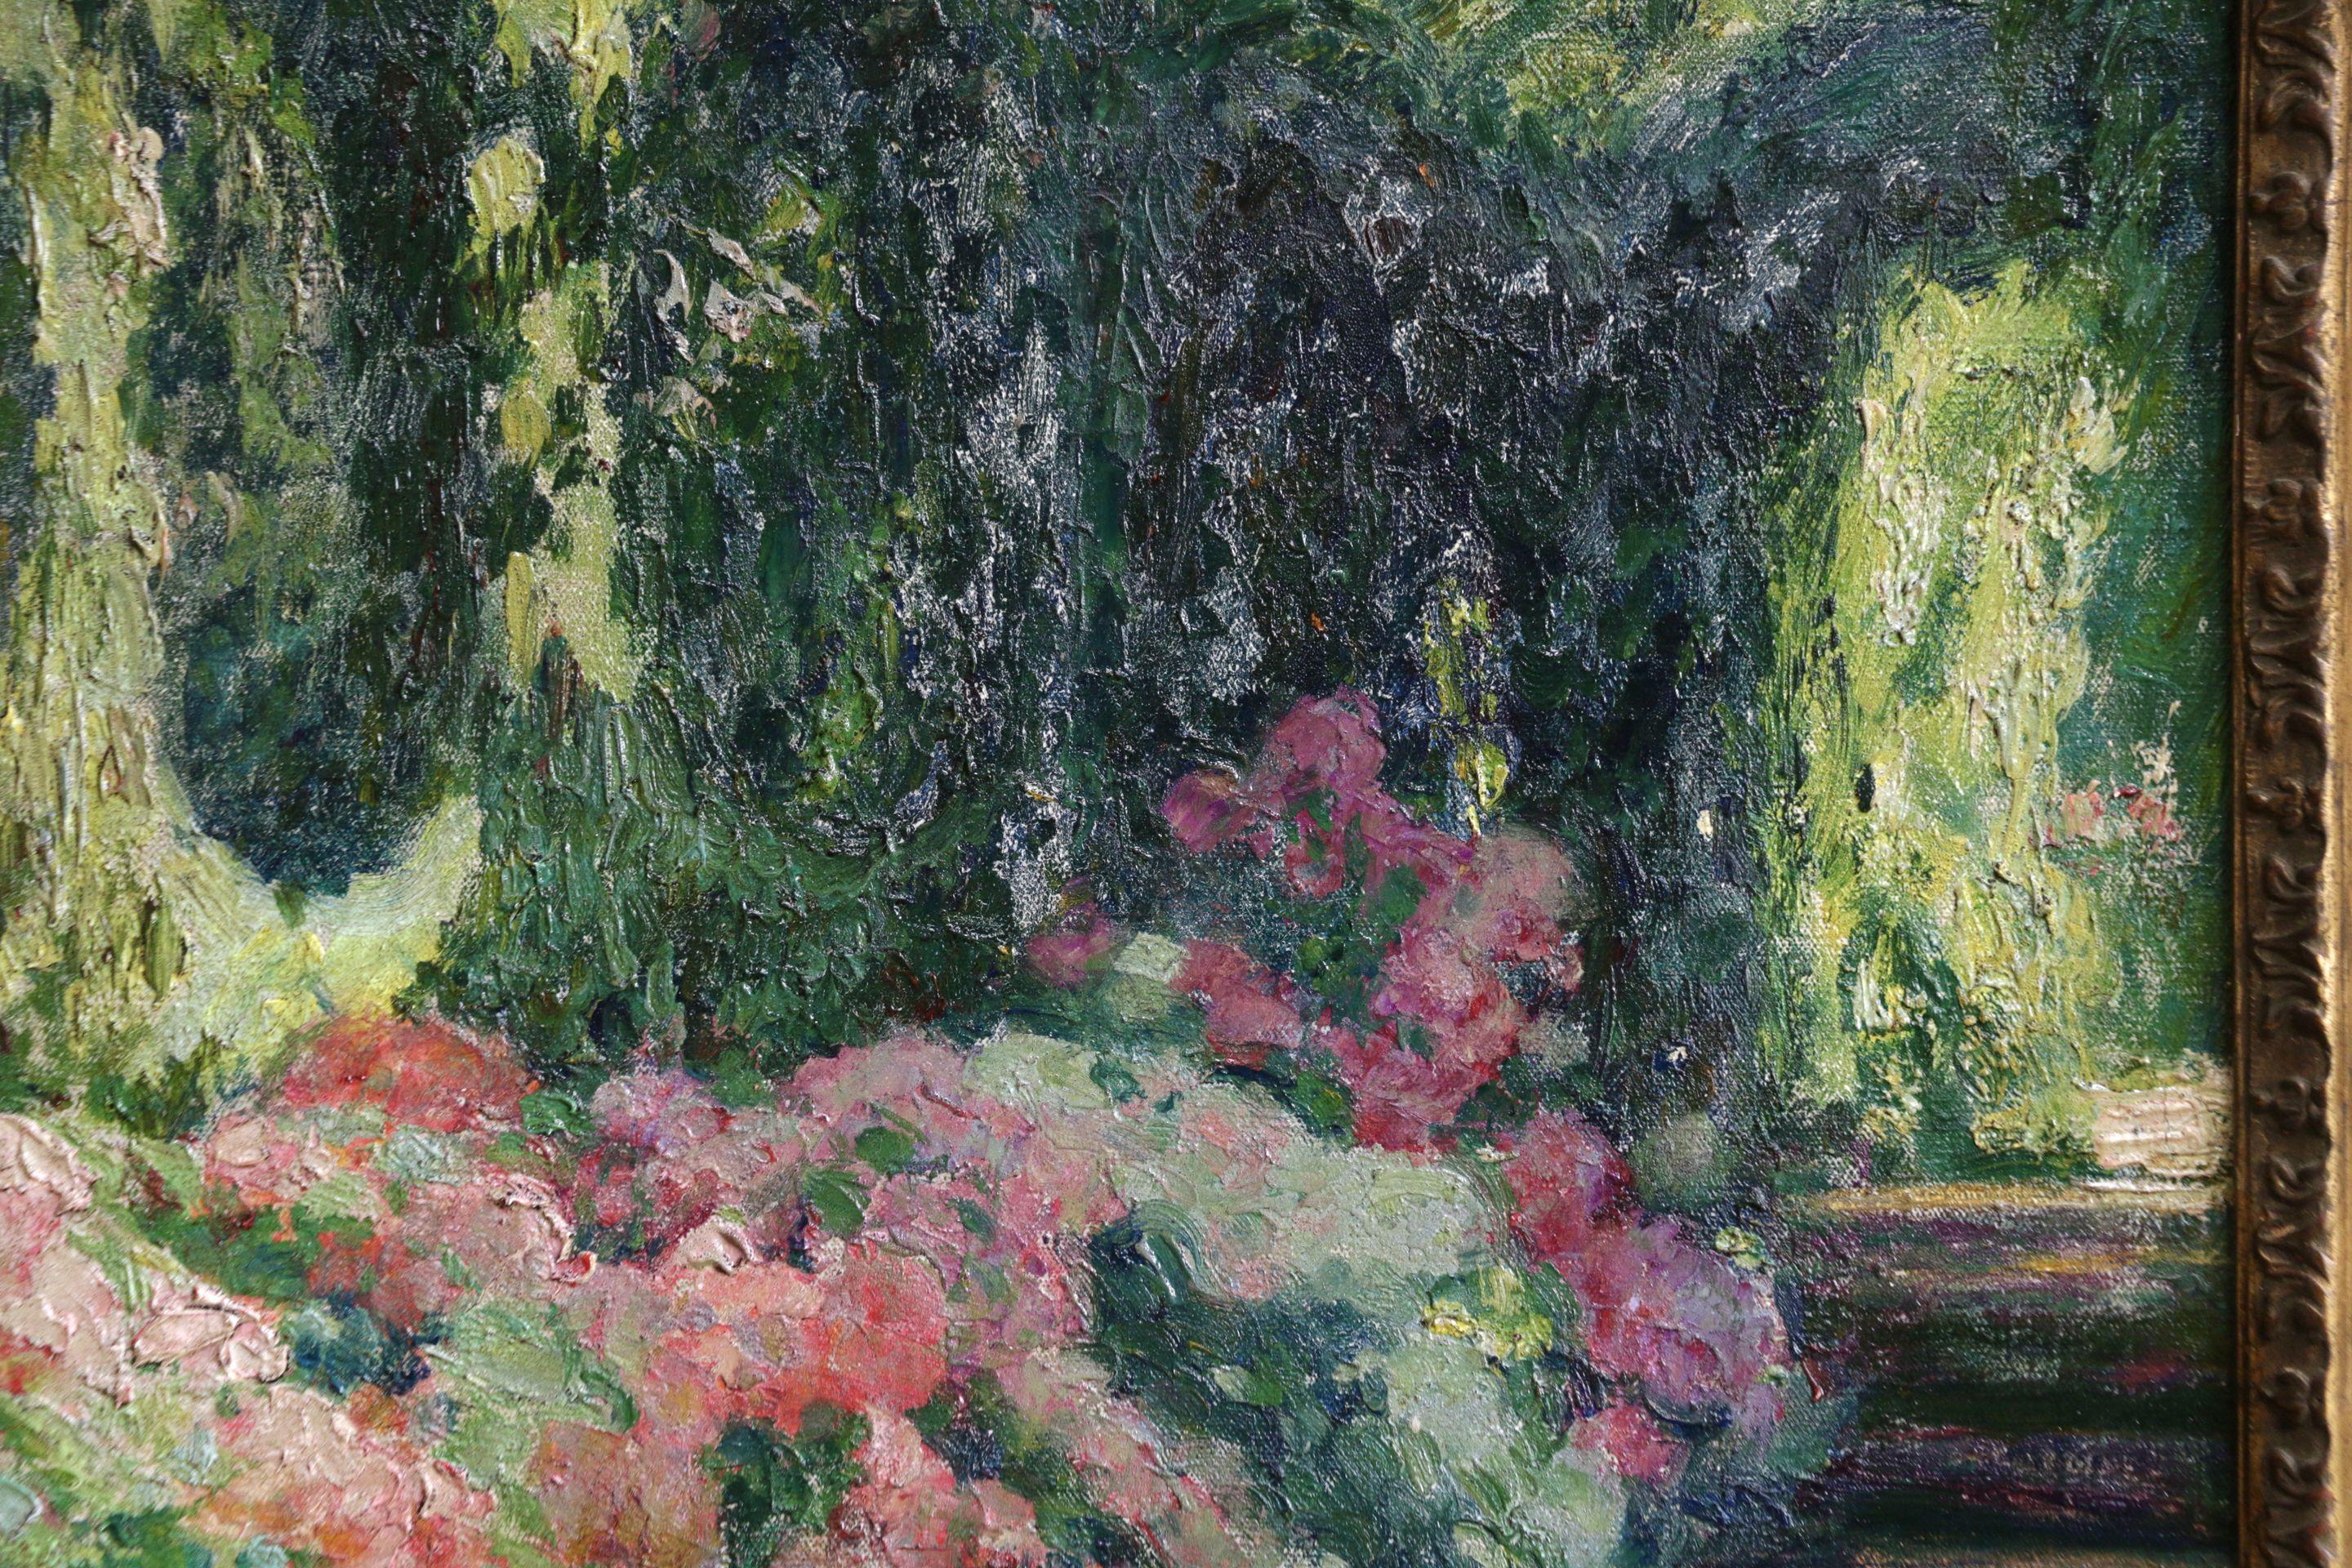 A wonderful and beautifully coloured oil on original canvas by Octave Guillonnet depicting a garden in bloom. Signed and dated 1924 lower right. Framed dimensions are 22 inches high by 19 inches wide.

Émile Guillonnet was a student of Lionel Royer